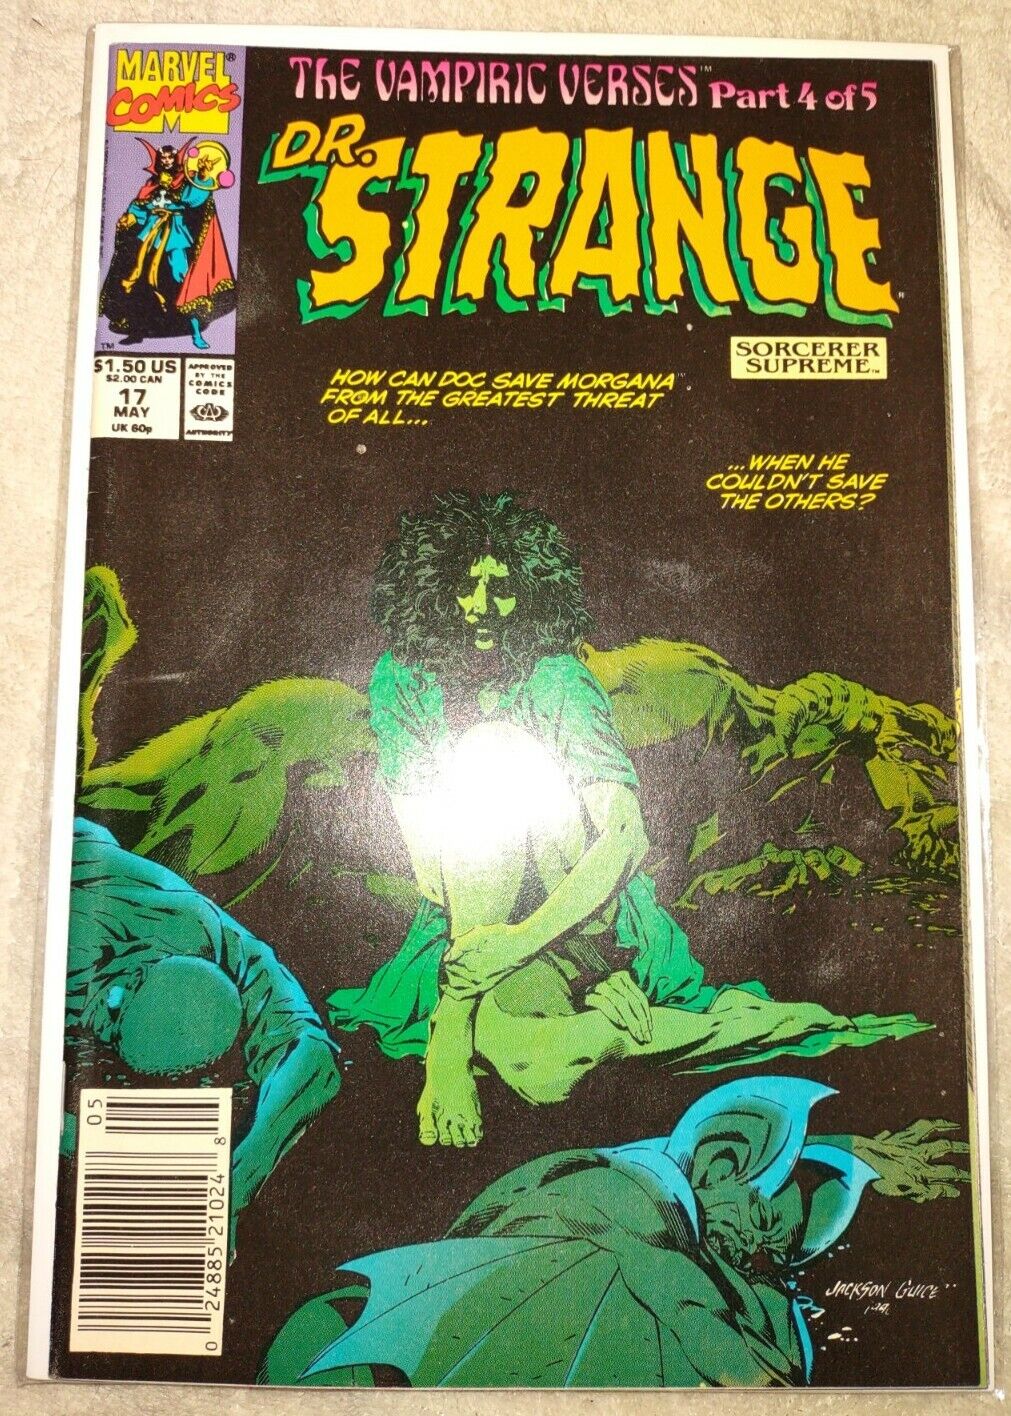 DR. STRANGE #17 FIRST APPEARANCE MARVEL ZOMBIES MORBIUS/BROTHER VOODOO 